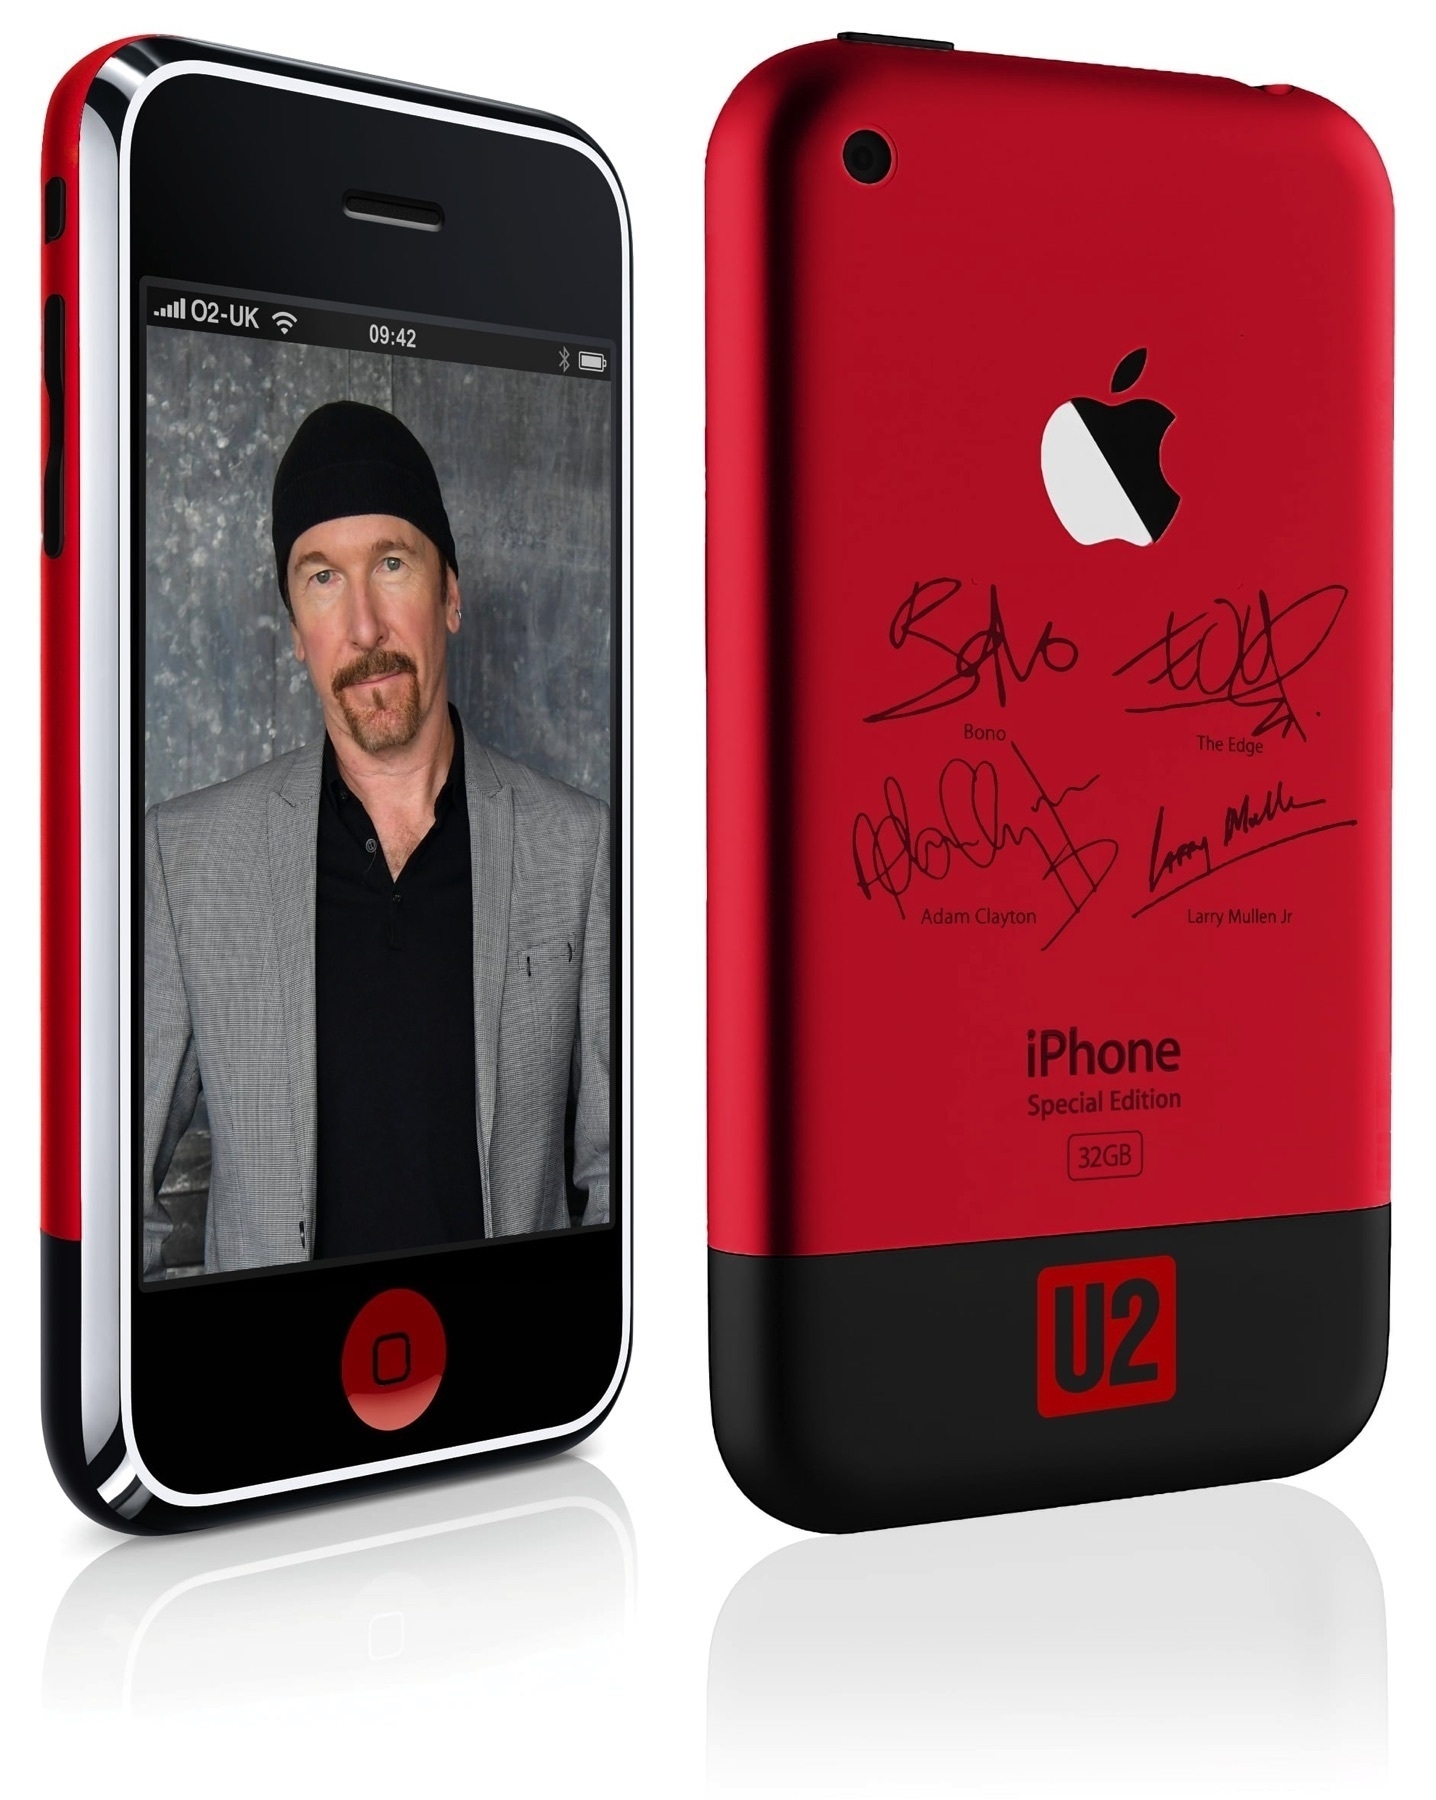 iPhone U2 Special Edition featuring The Edge